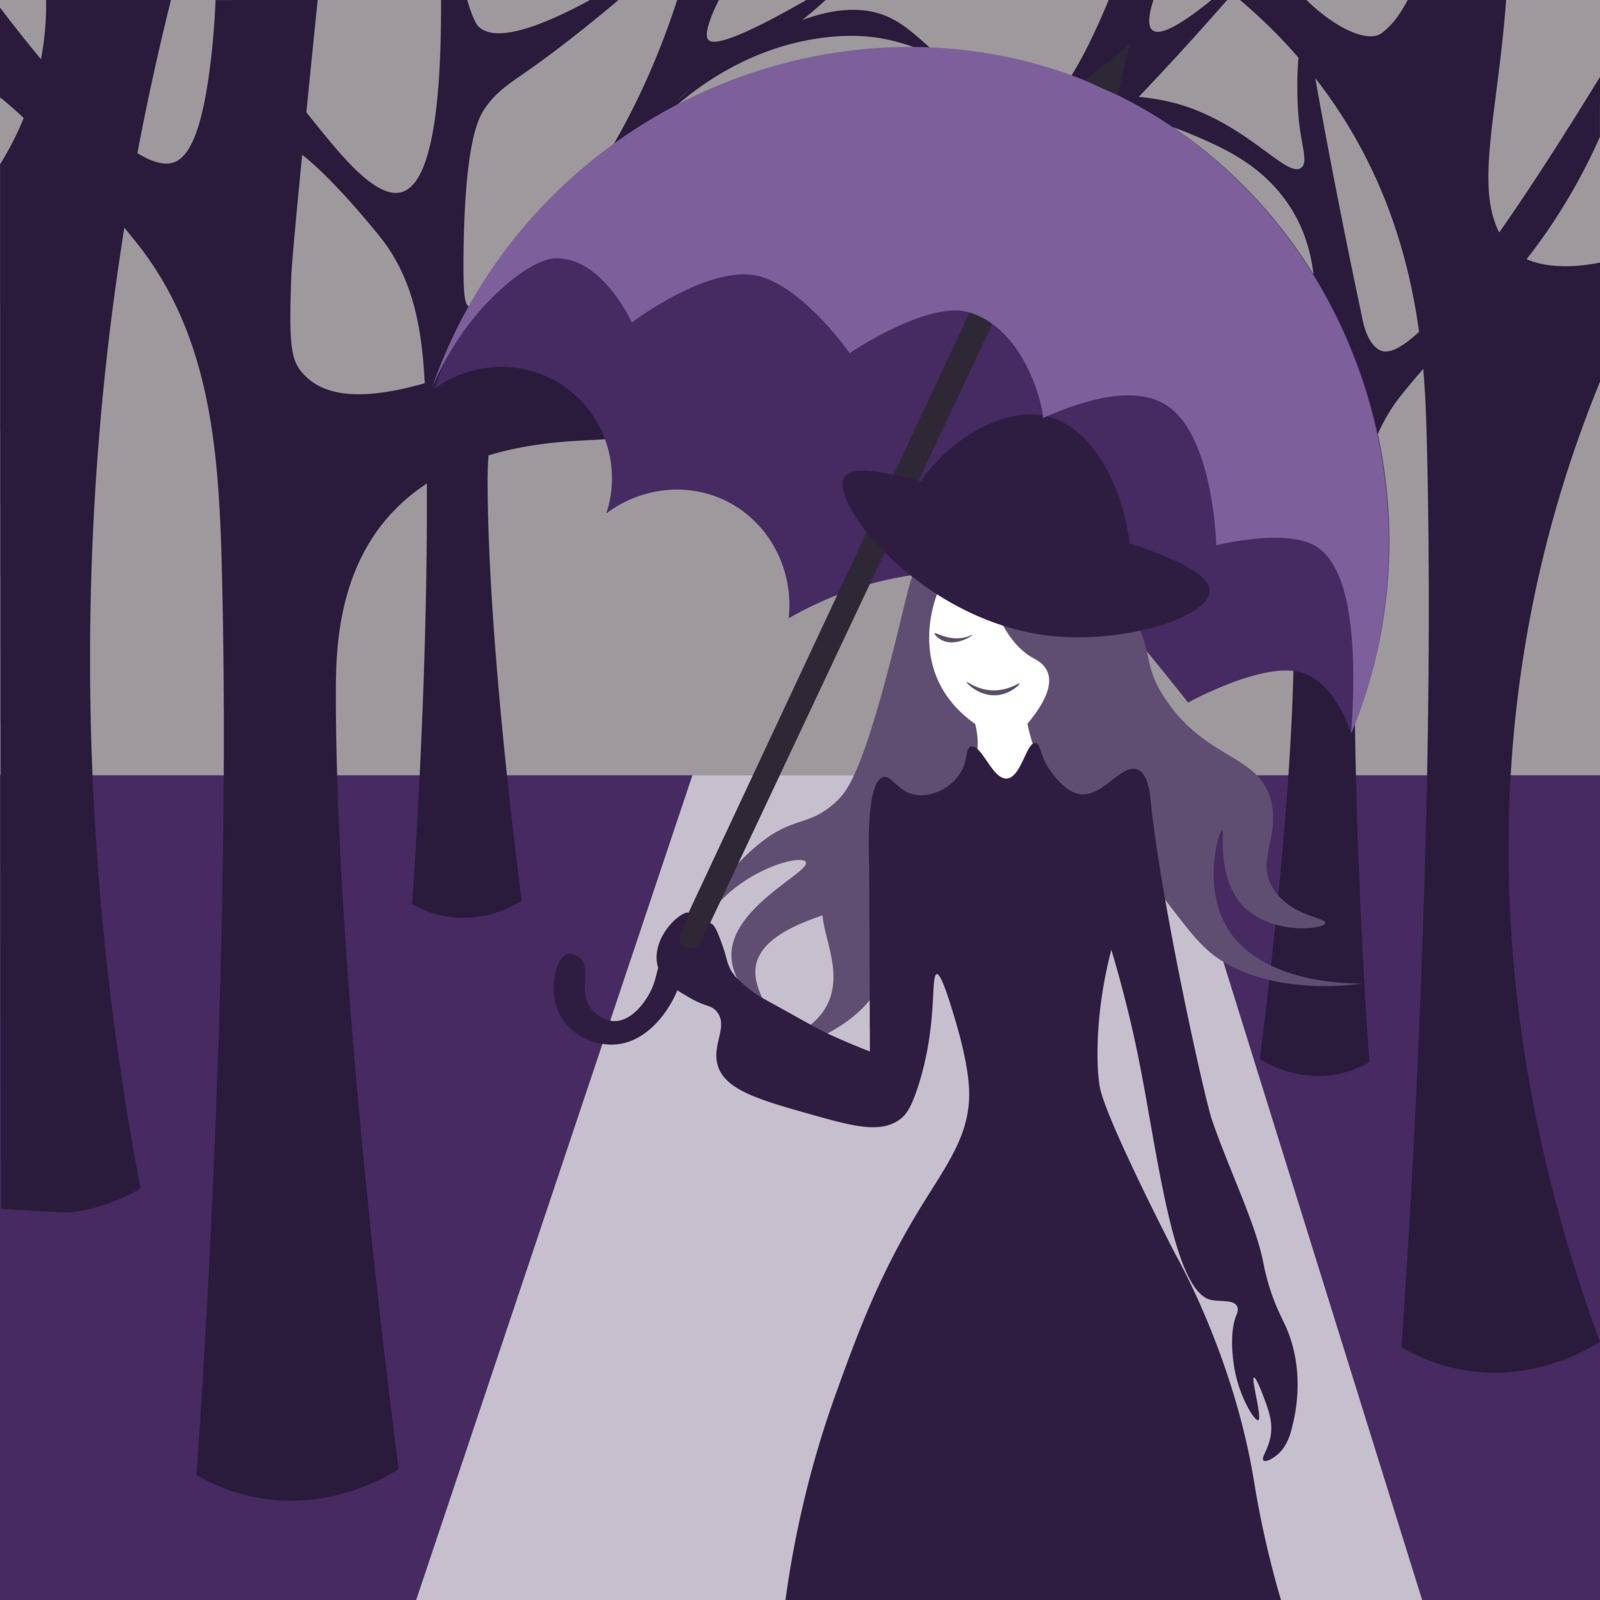 Old-fashioned woman with a parasol walking through the park in violet shades by paranoido